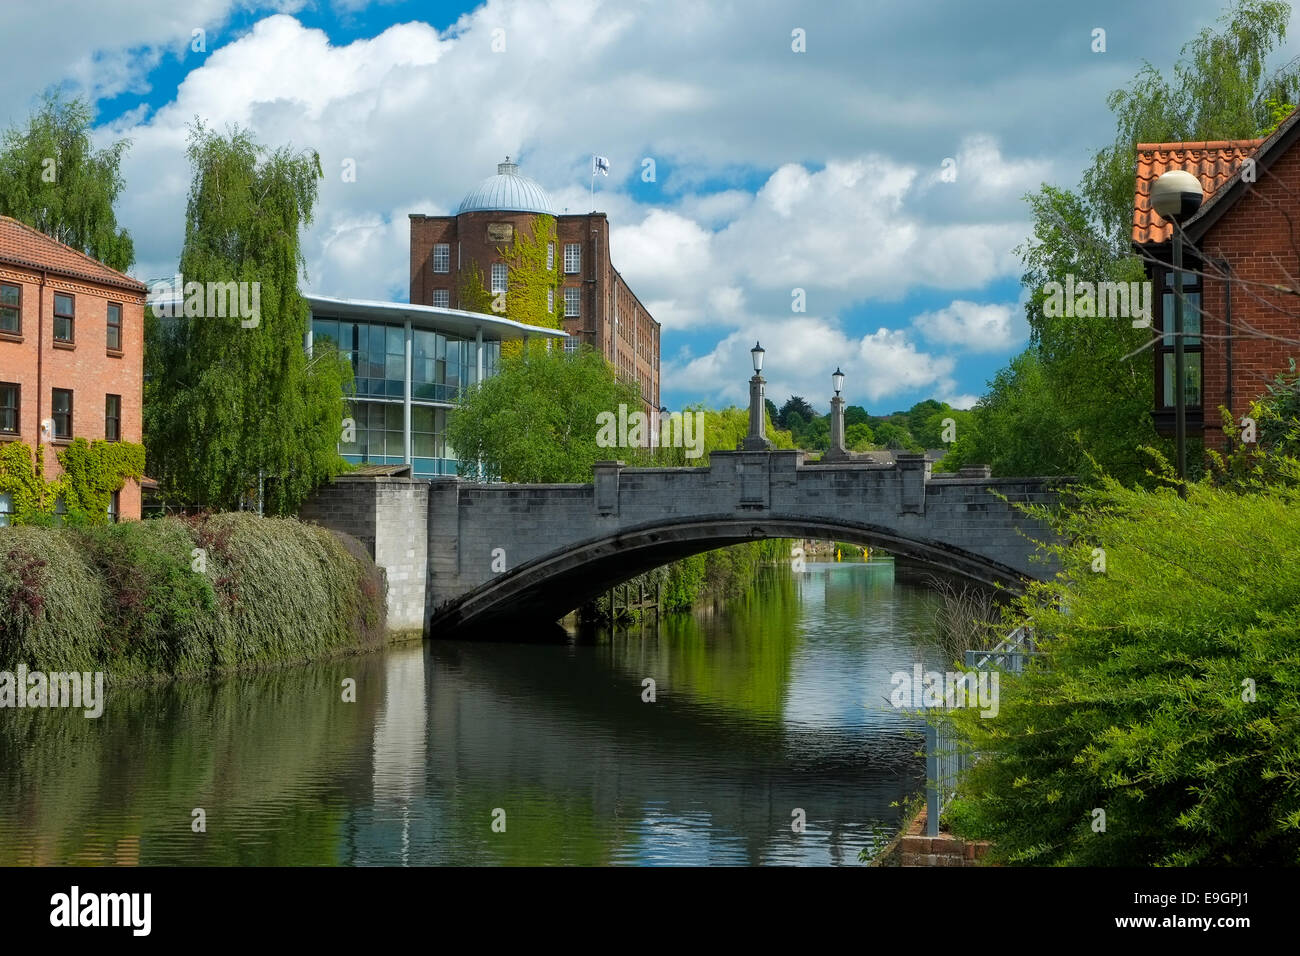 Whitefriars Bridge in Norwich, built in the 1920s by AE Collins. Stock Photo